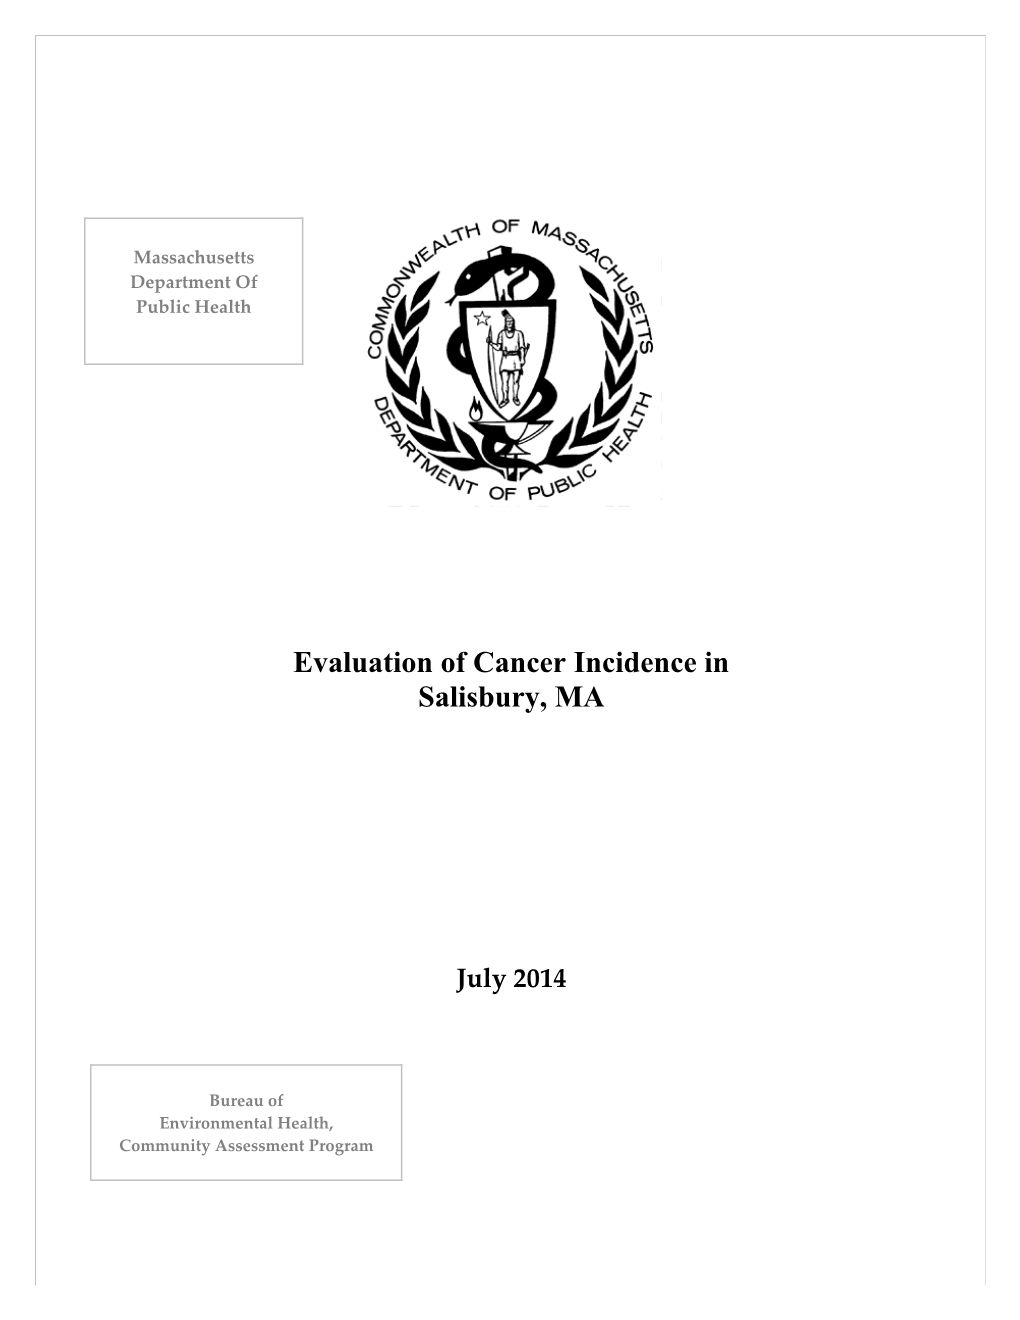 Evaluation of Cancer Incidence in Salisbury, MA - July 2014